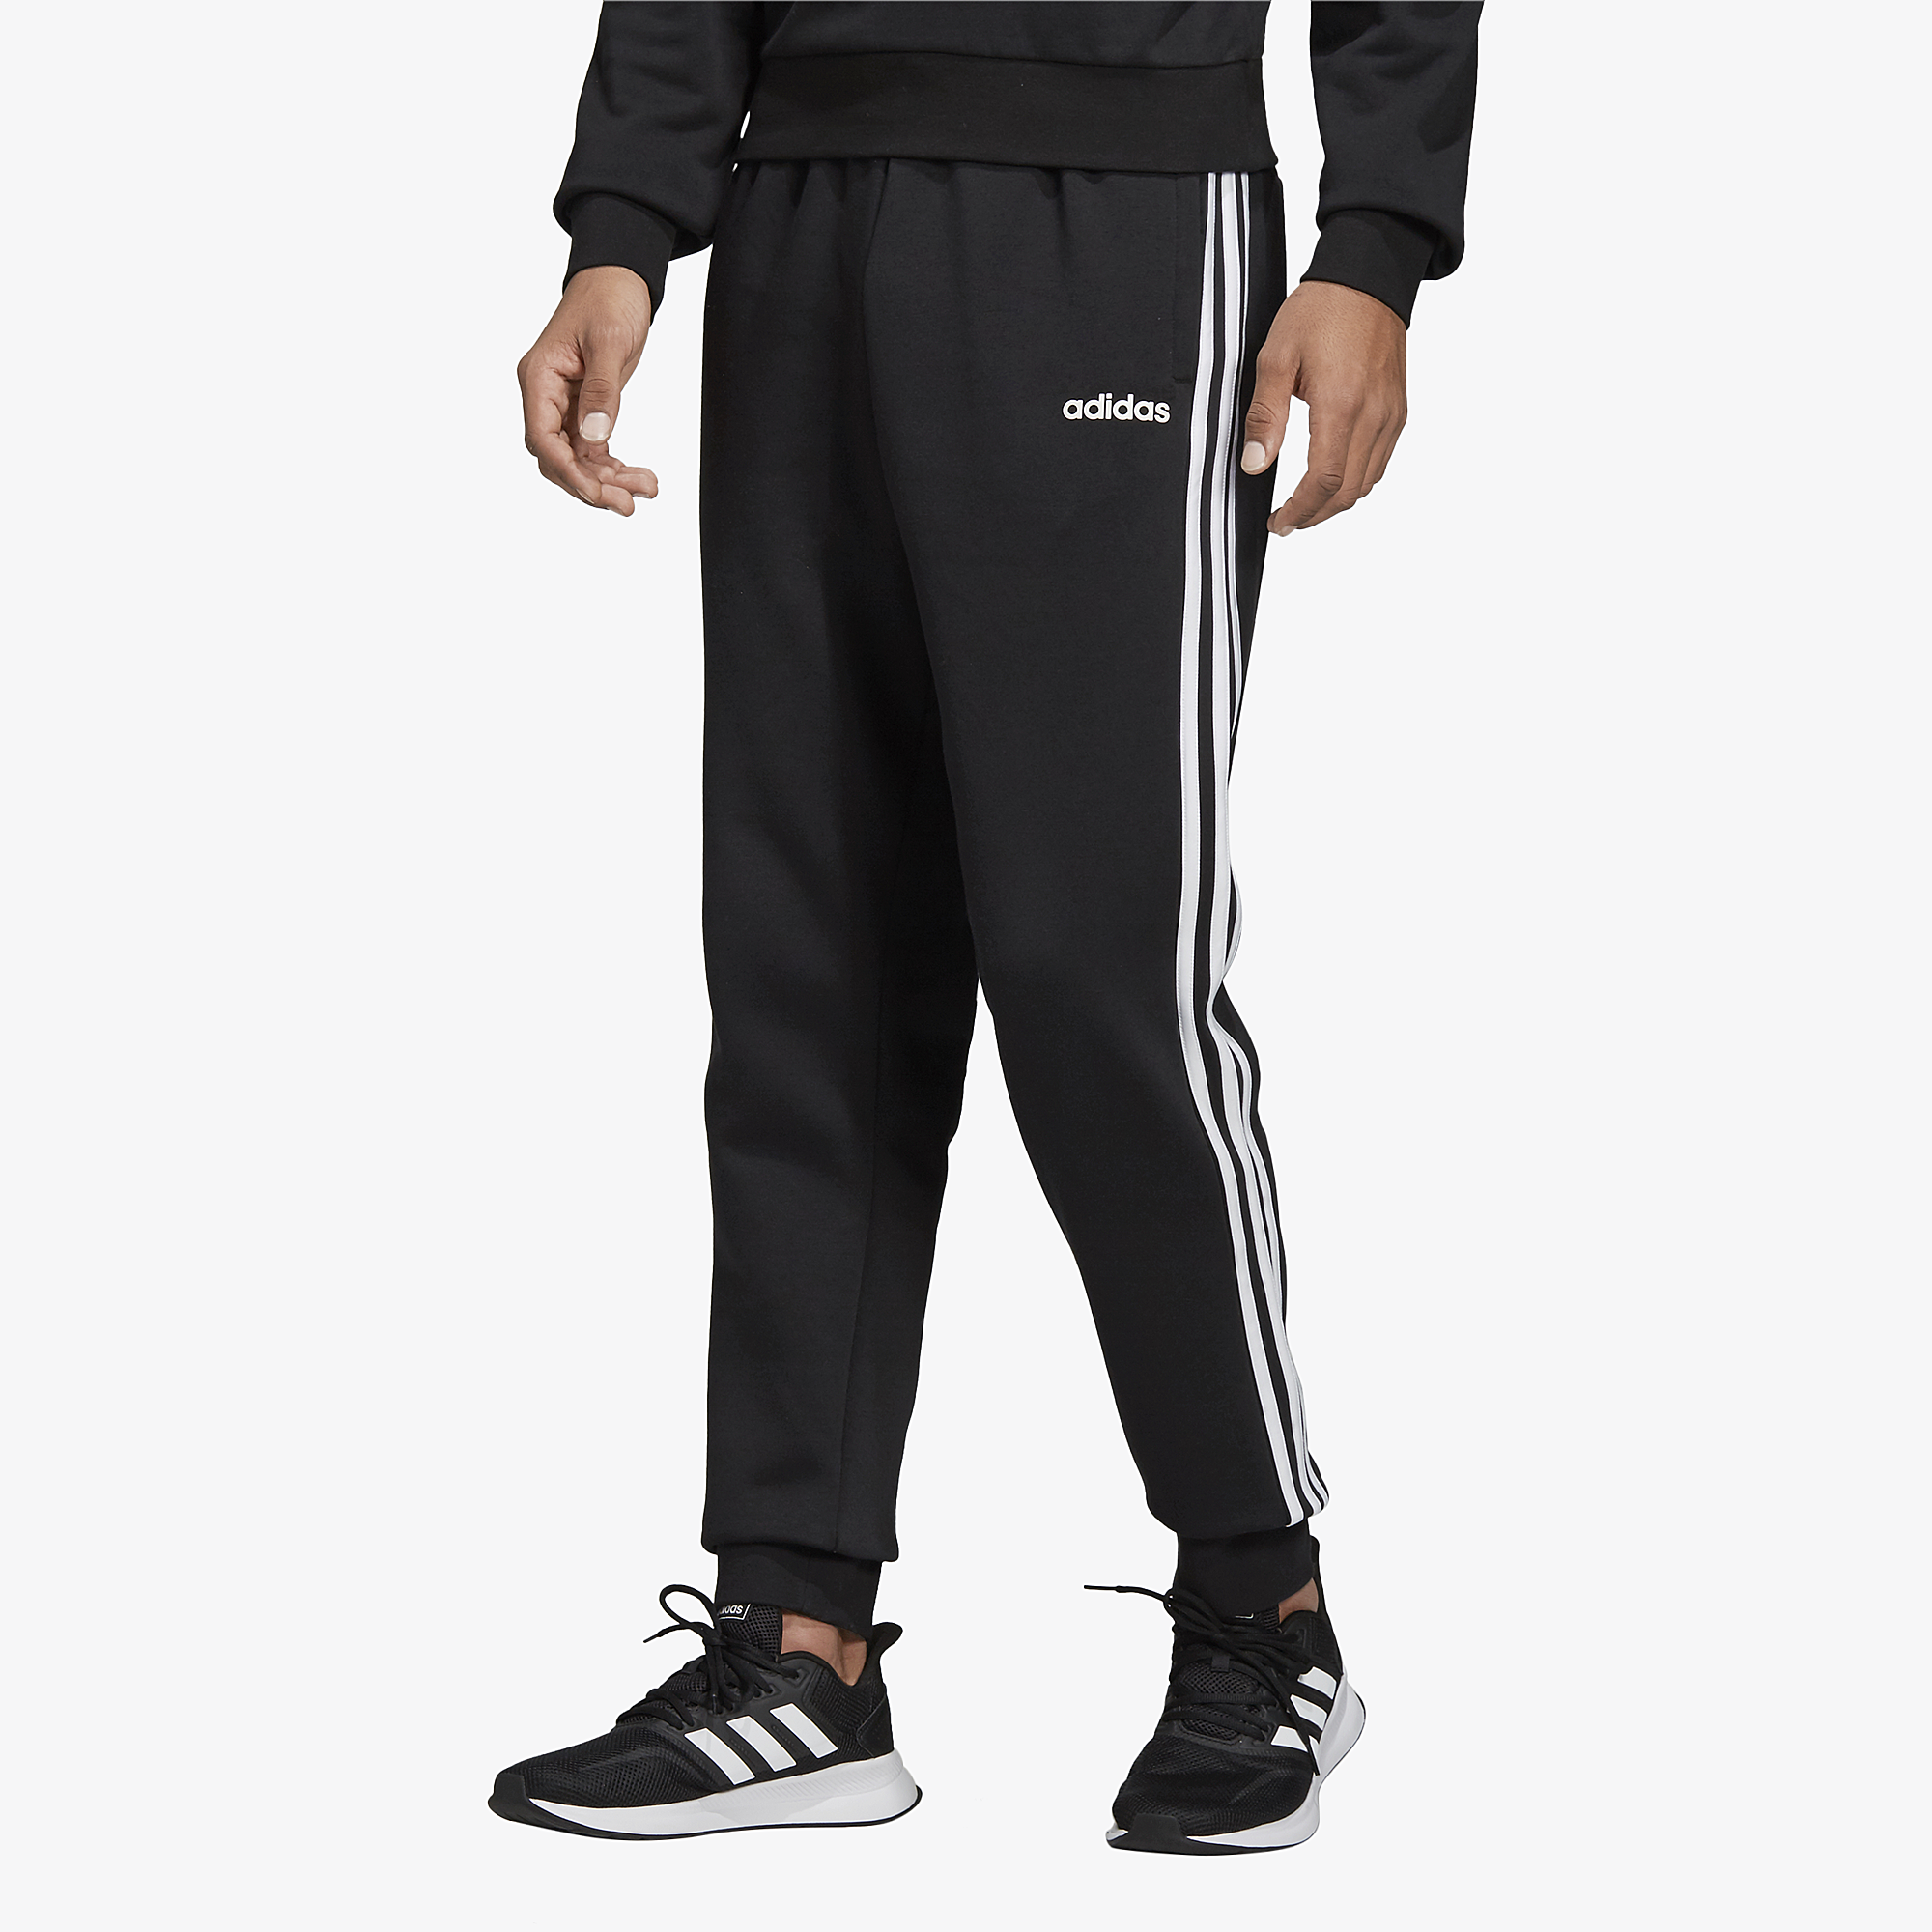 adidas joggers champs